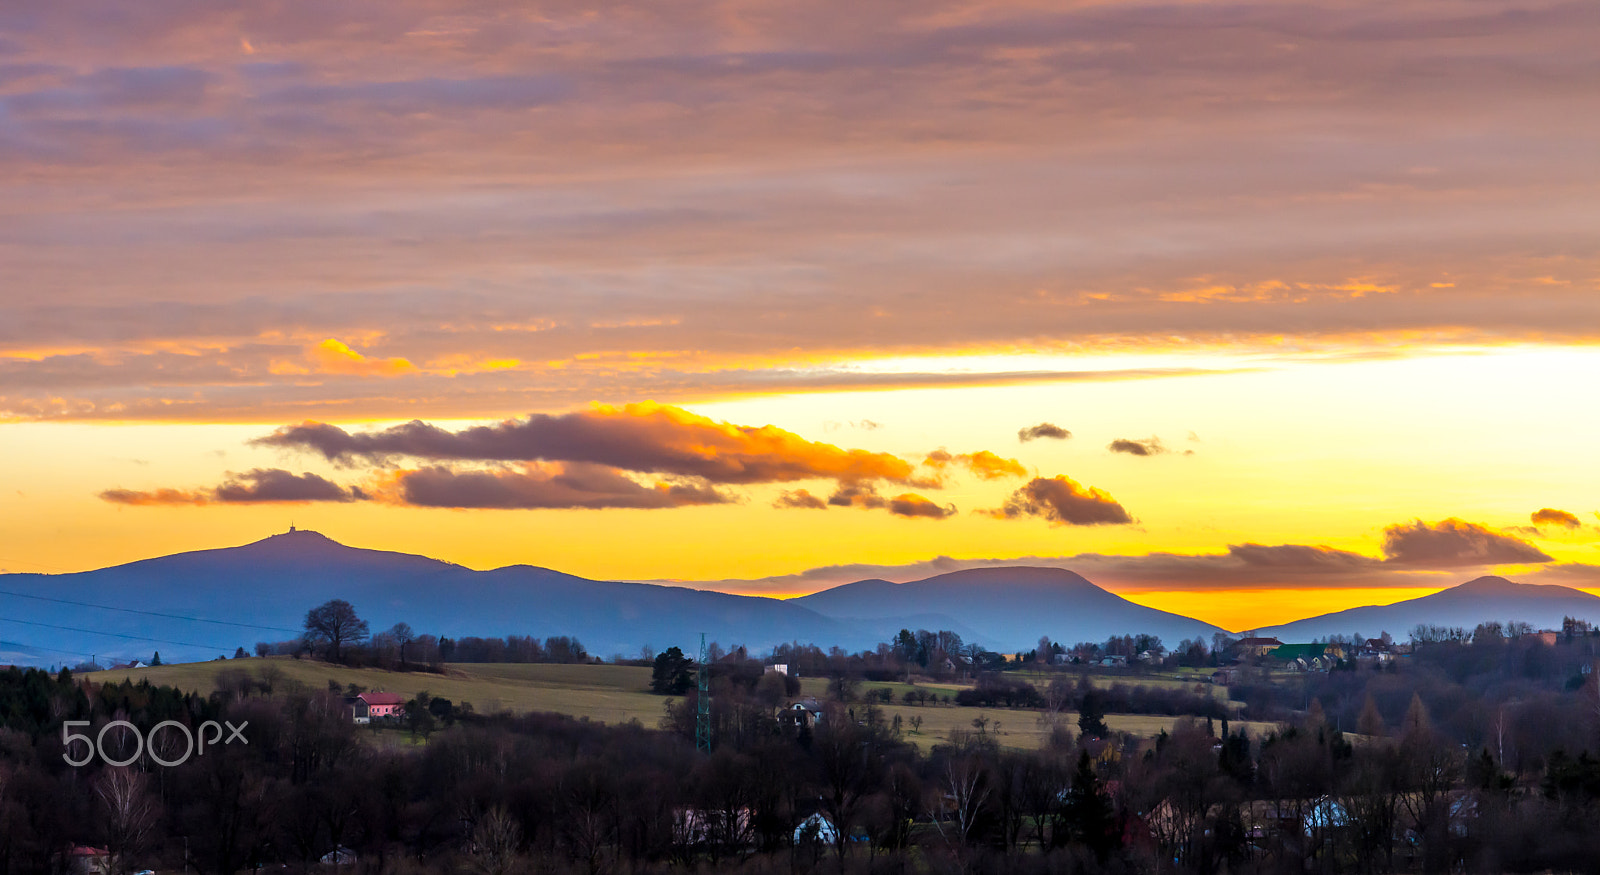 Nikon D7200 + Sigma 17-70mm F2.8-4 DC Macro OS HSM | C sample photo. Sunset over distant mountains 2 photography